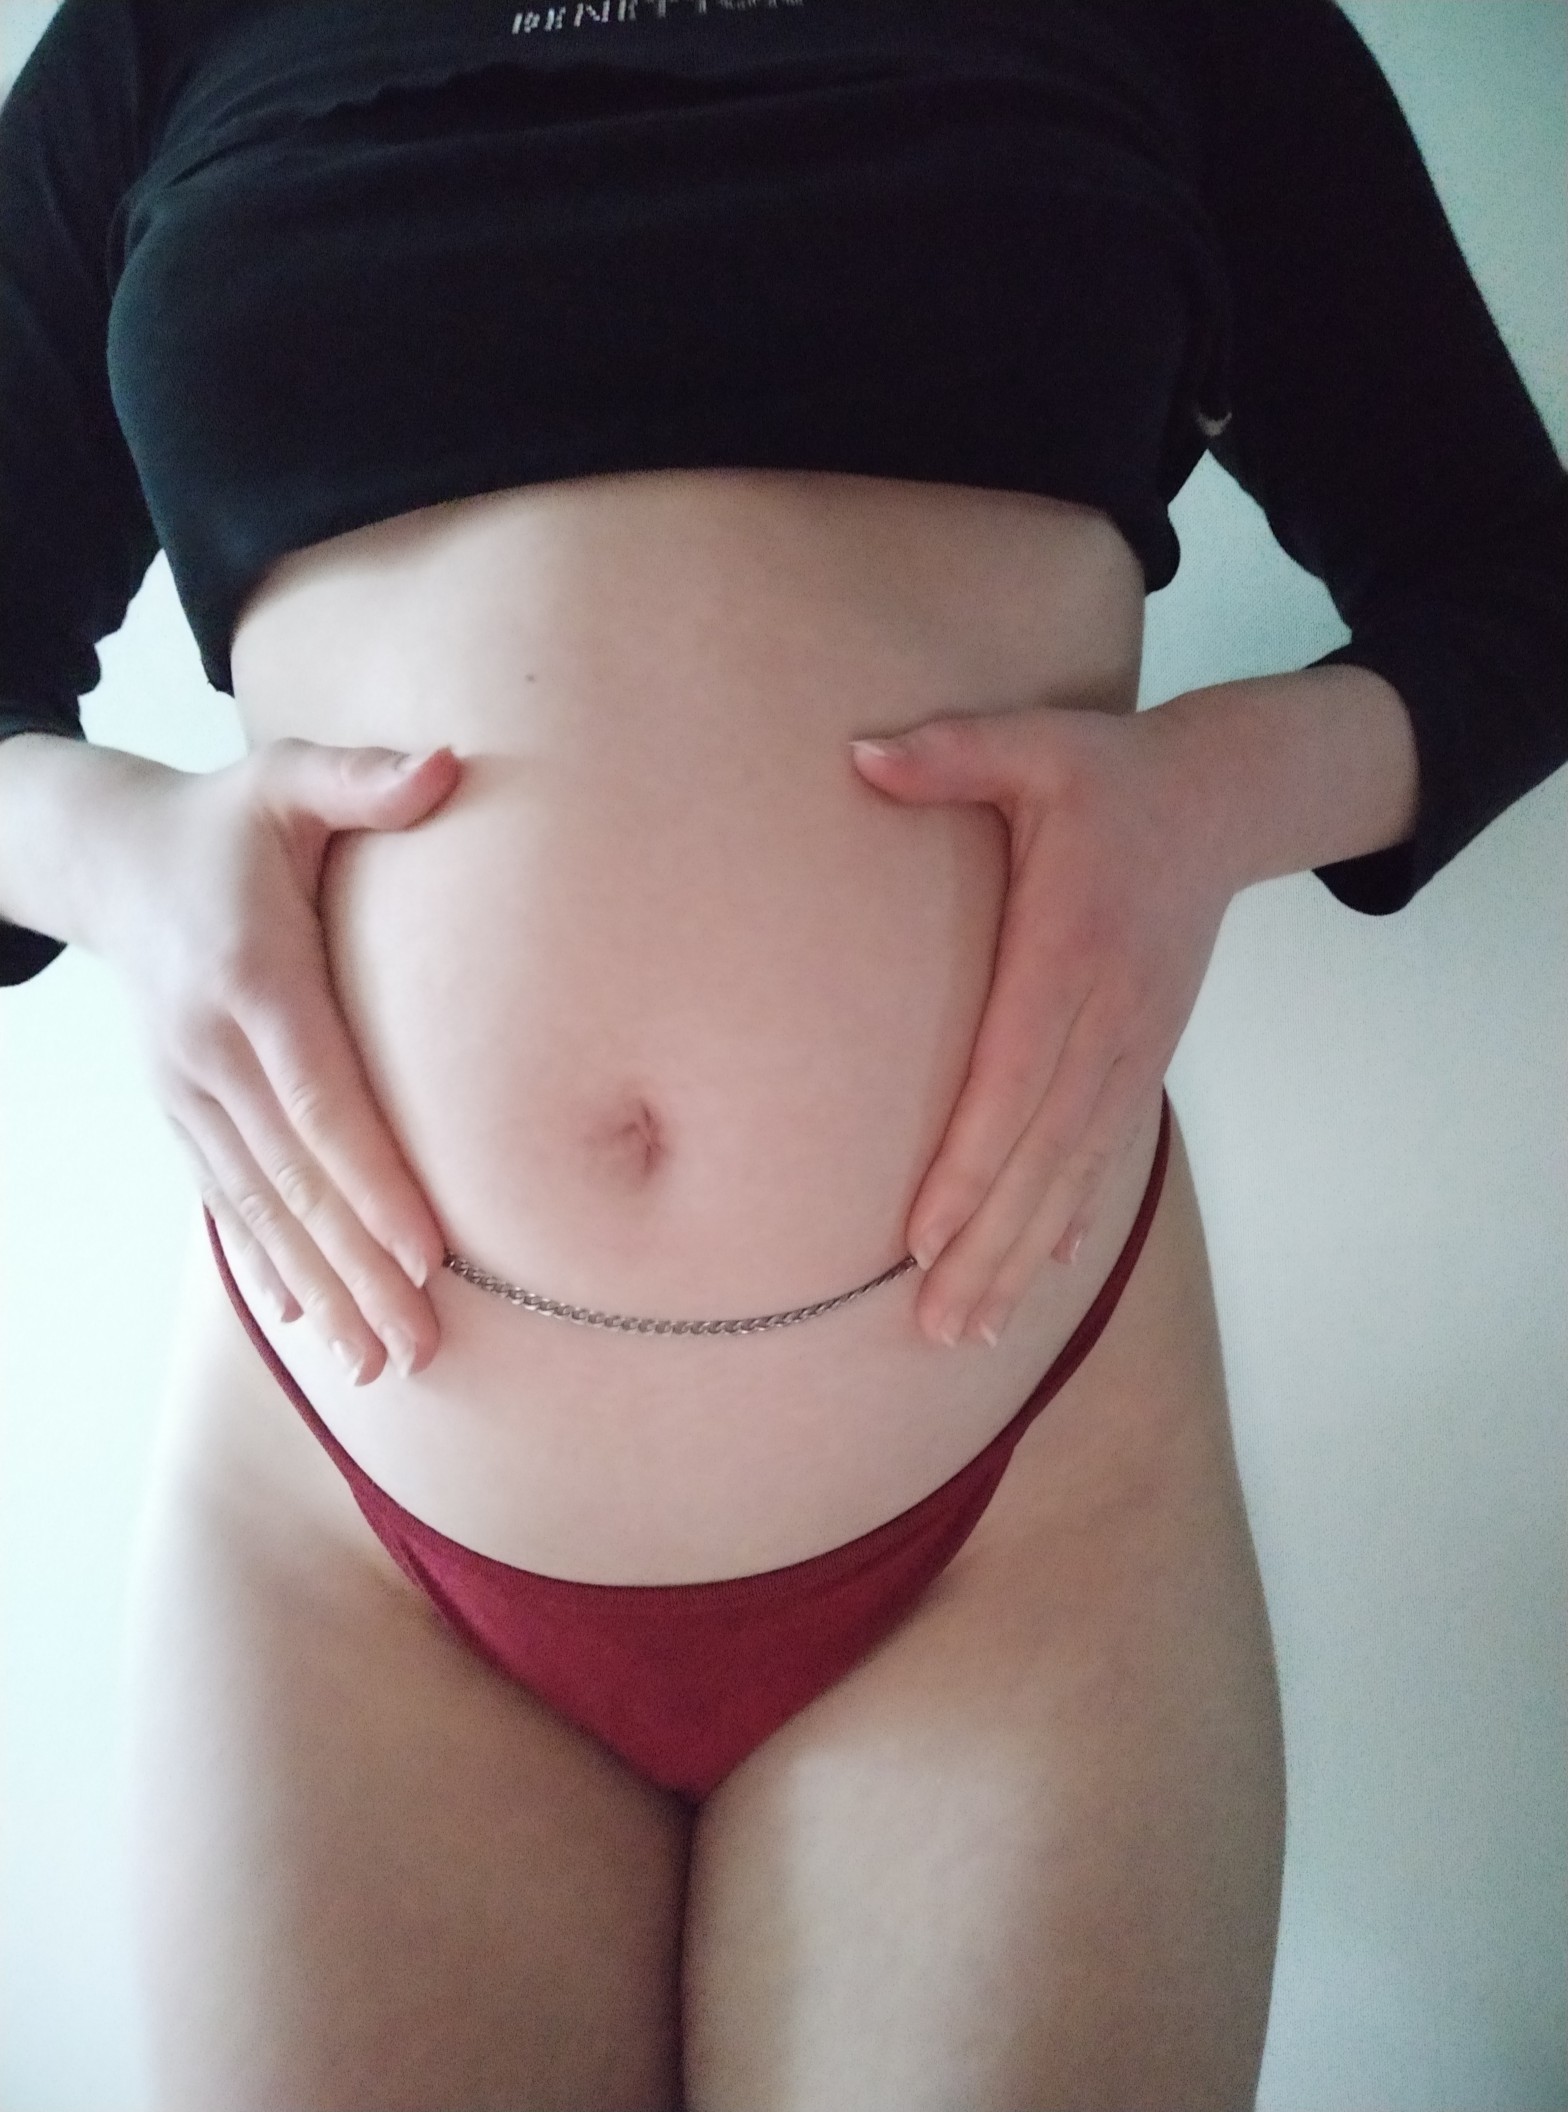 bellabloatbelly:What do you think? (´∧ω∧｀*) porn pictures